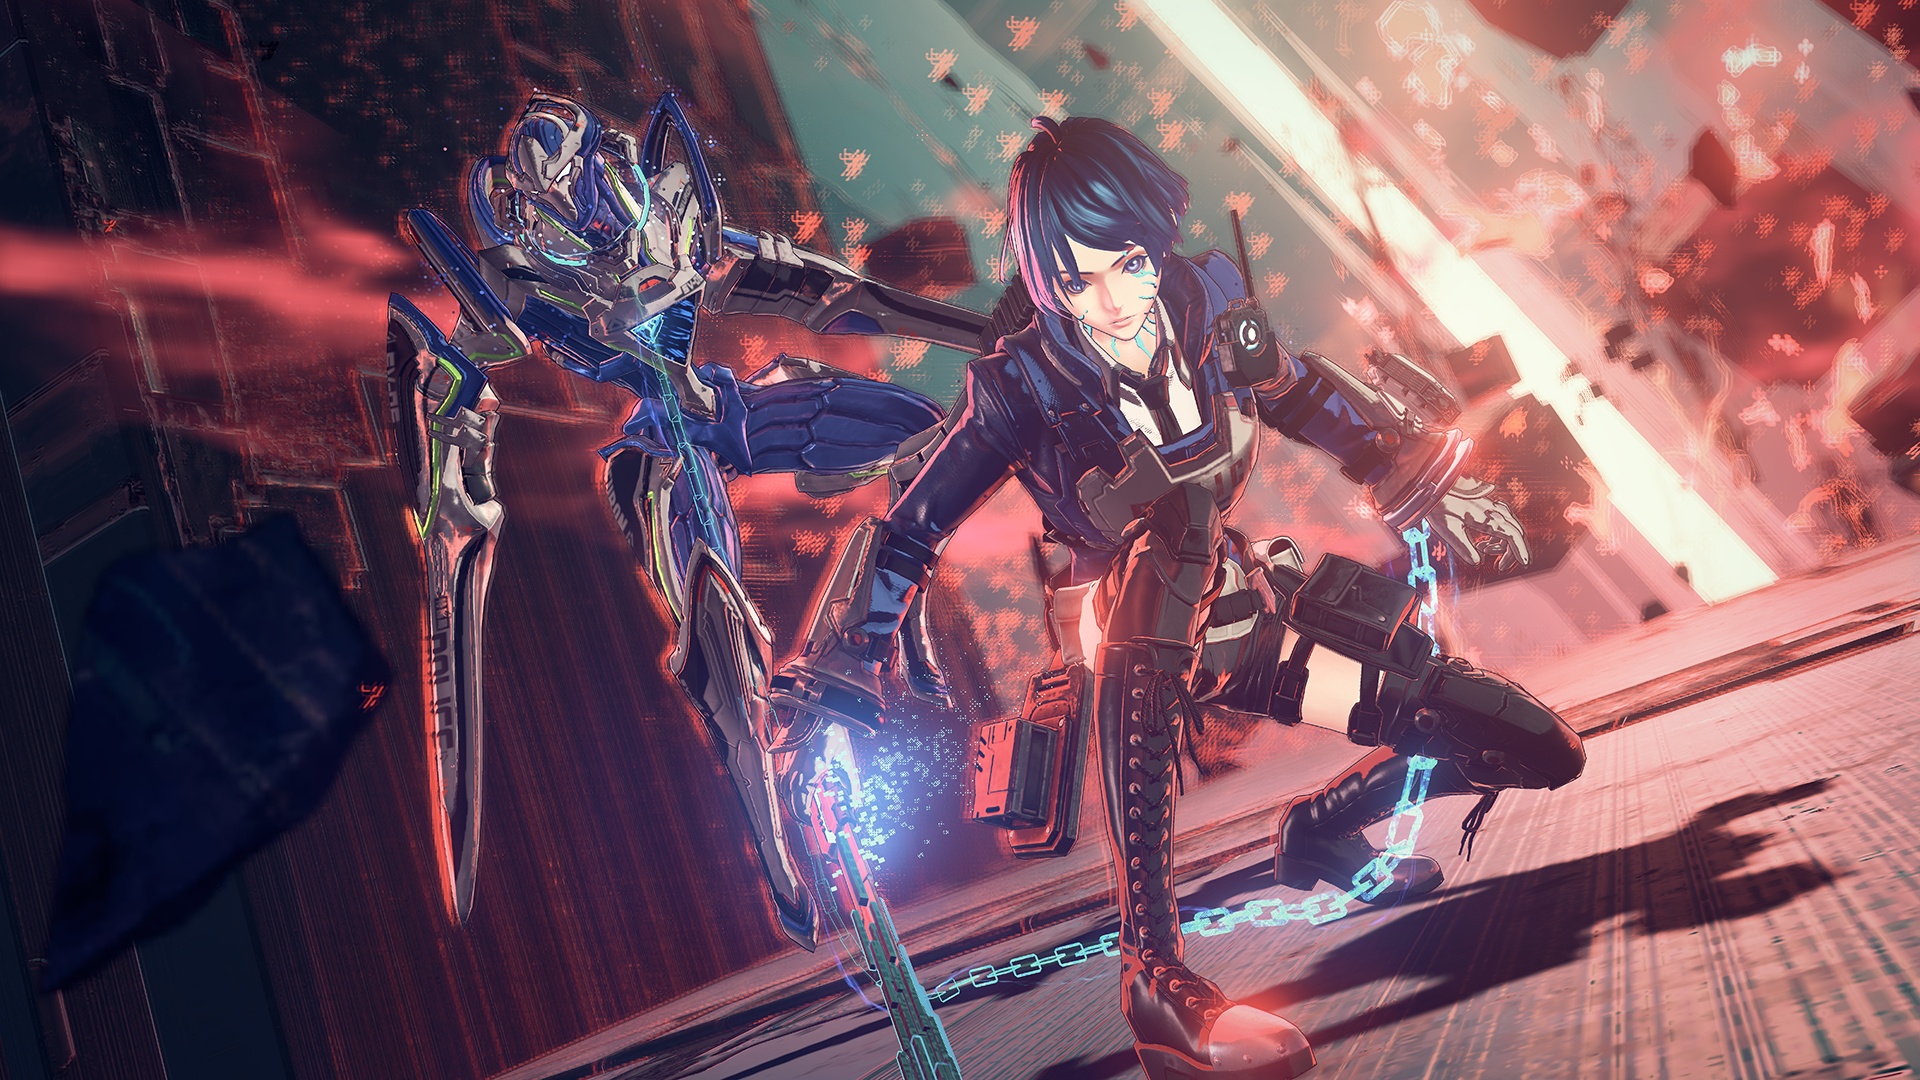 Platinum says Astral Chain ‘is Nintendo’s IP’ after fans notice copyright change | VGC